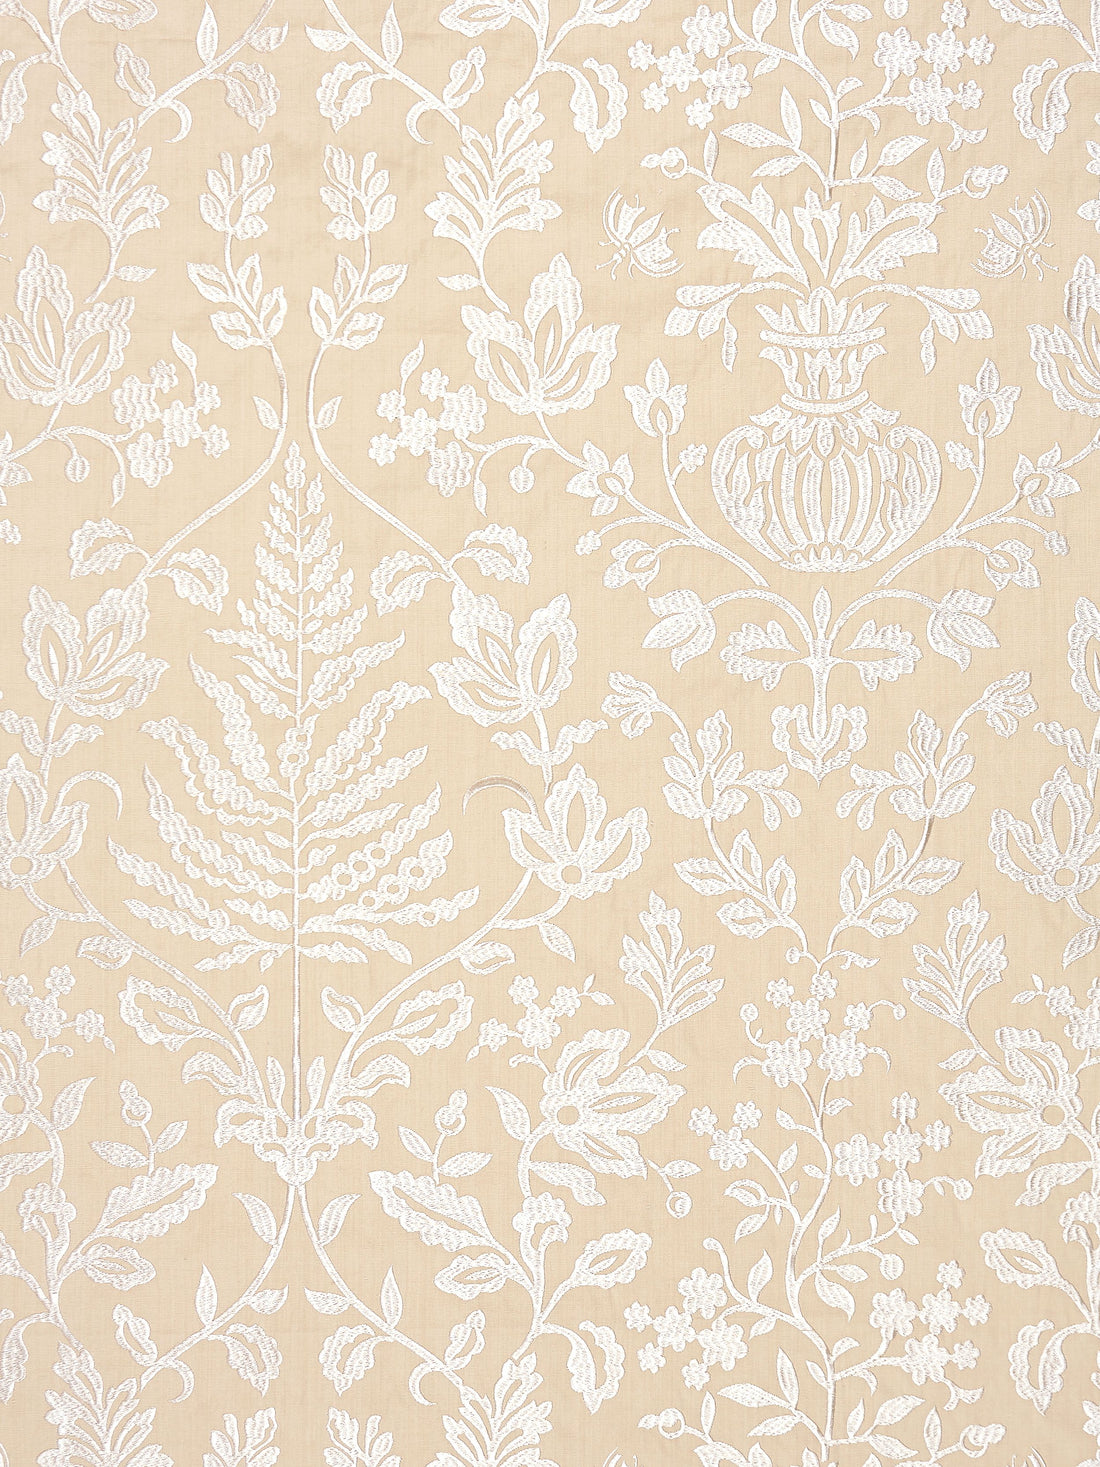 Shalimar Embroidery fabric in sand color - pattern number SC 000127032 - by Scalamandre in the Scalamandre Fabrics Book 1 collection